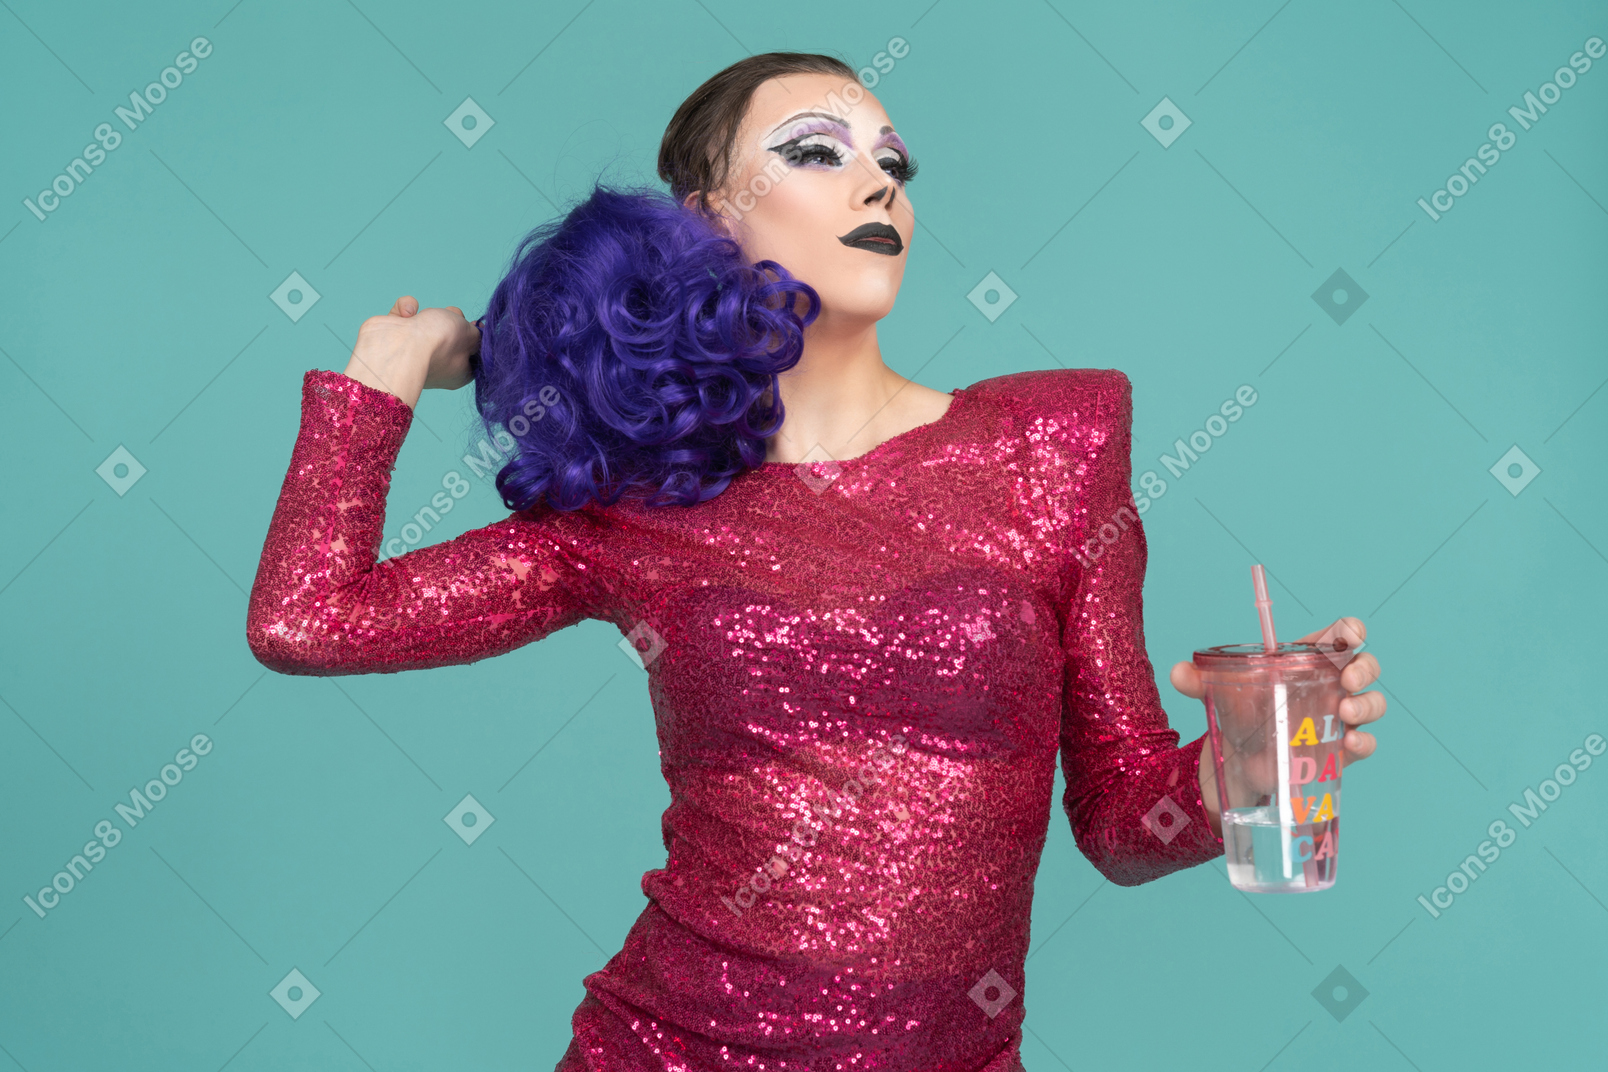 Drag queen in pink dress looking confident with drink in hand